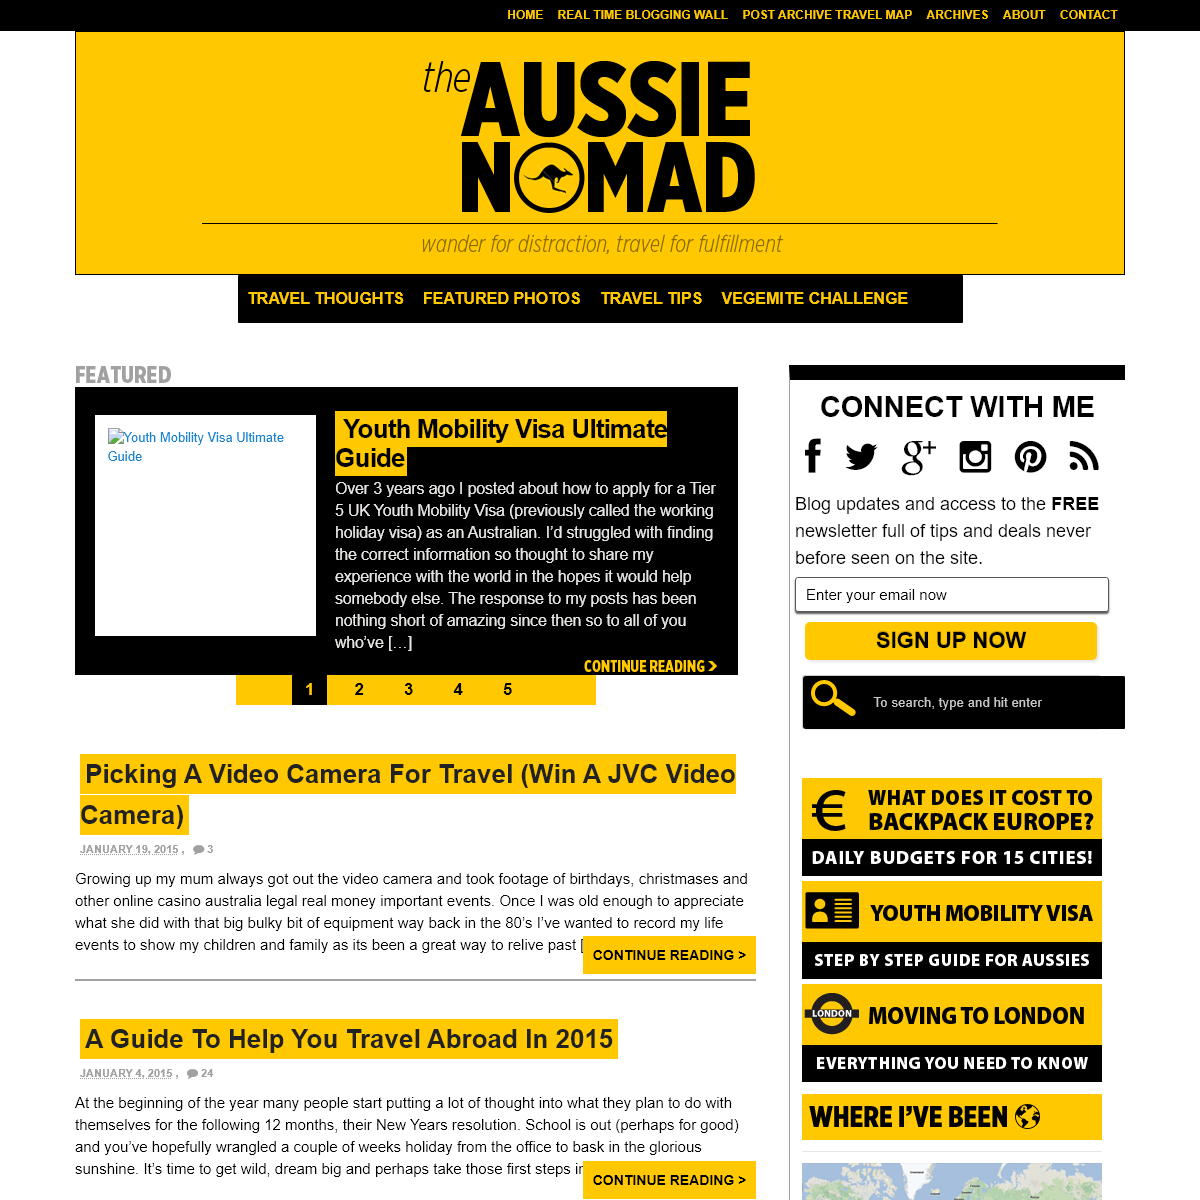 A complete backup of theaussienomad.com